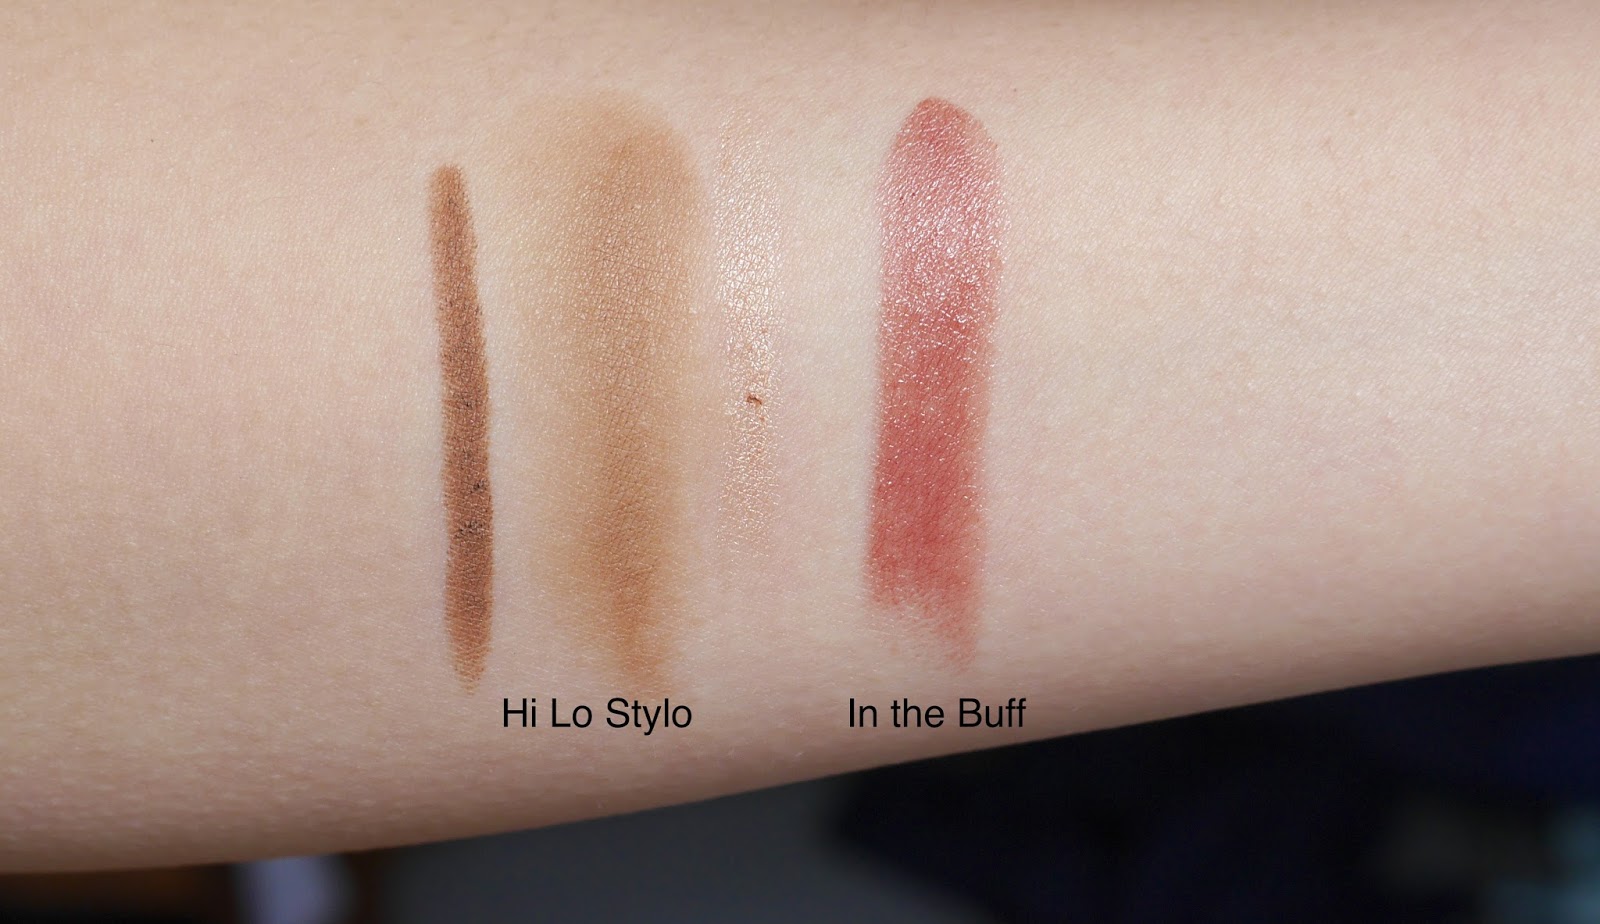 Hi Lo Stylo and In the Buff Swatches